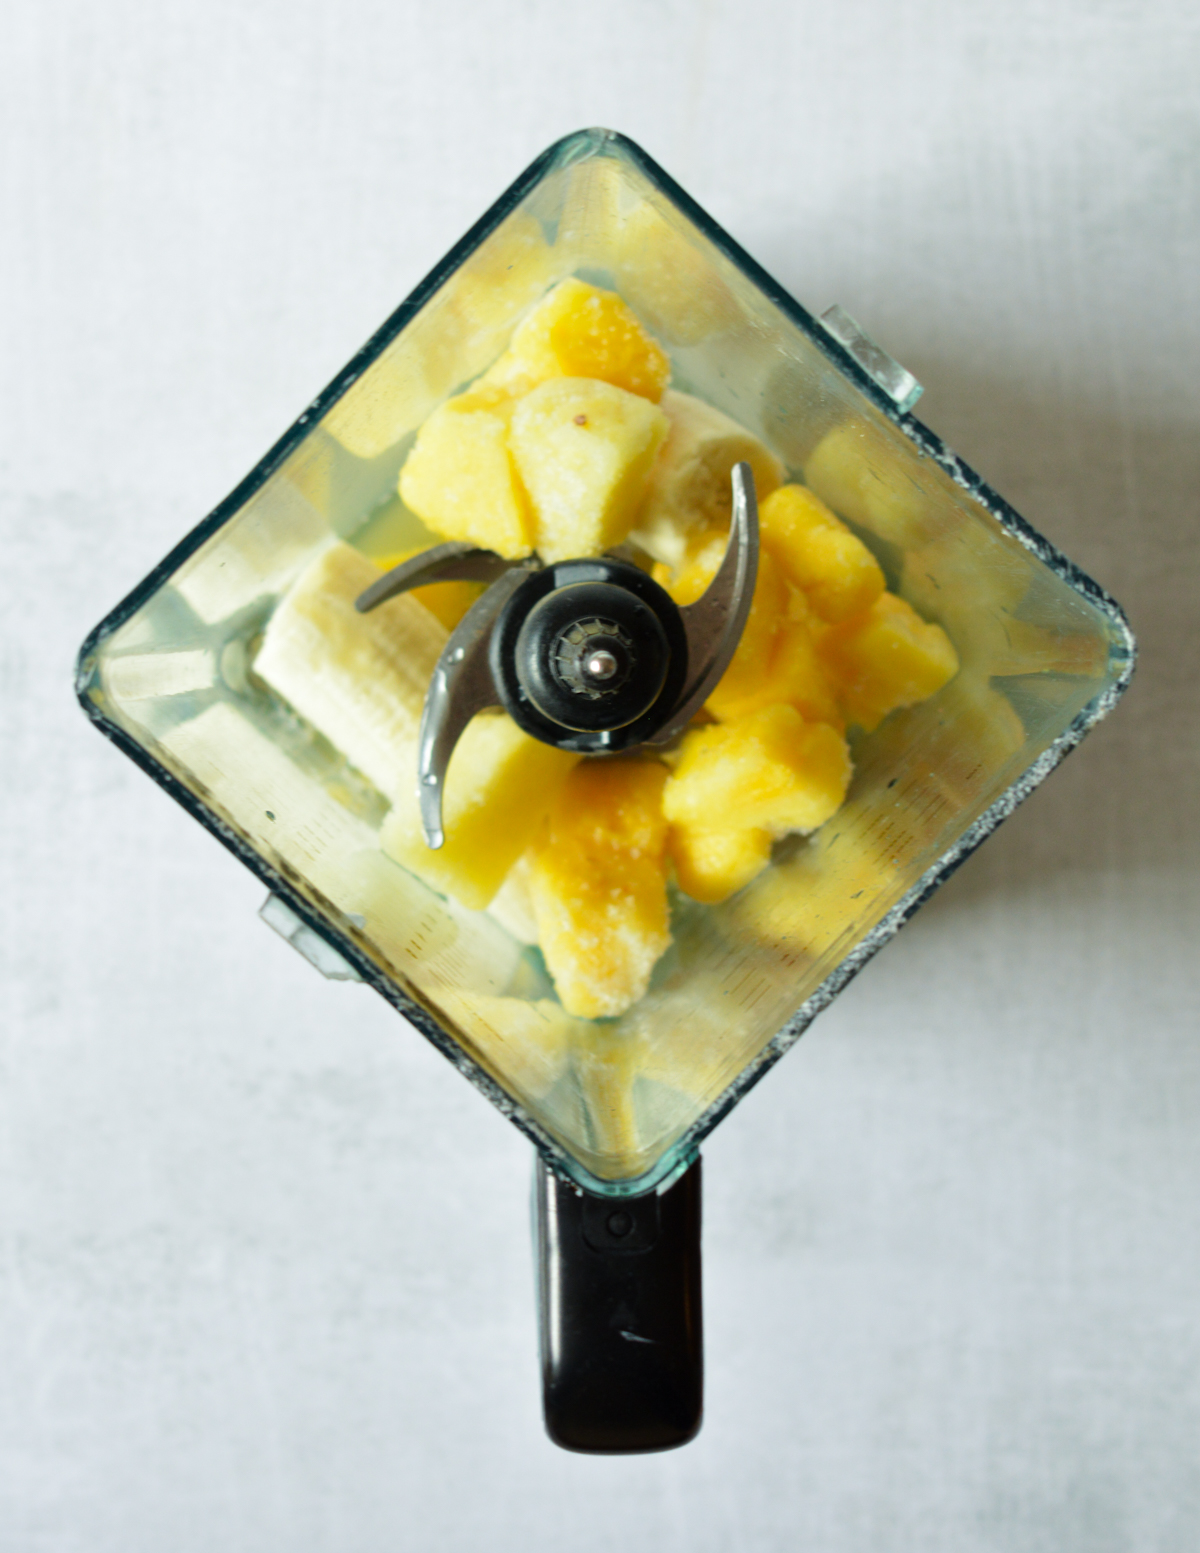 blender with pineapple, banana, and juice in it.